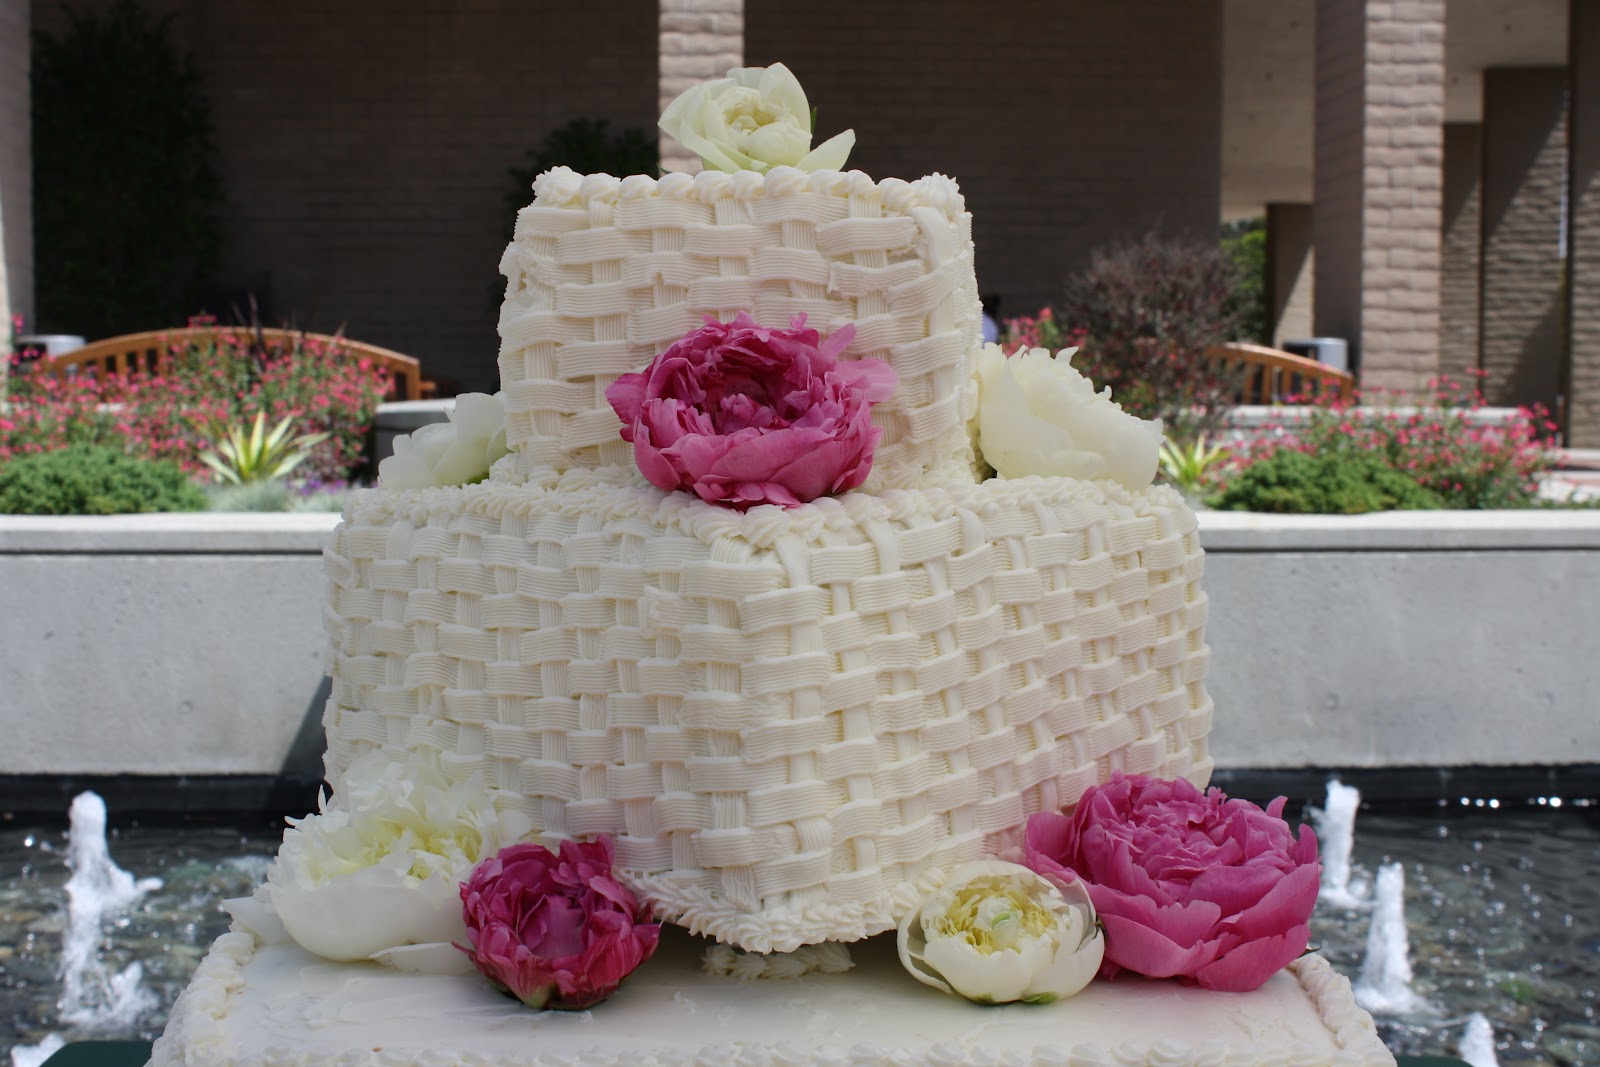 Cakes by Victoria Clare Basket Weave Wedding Cake